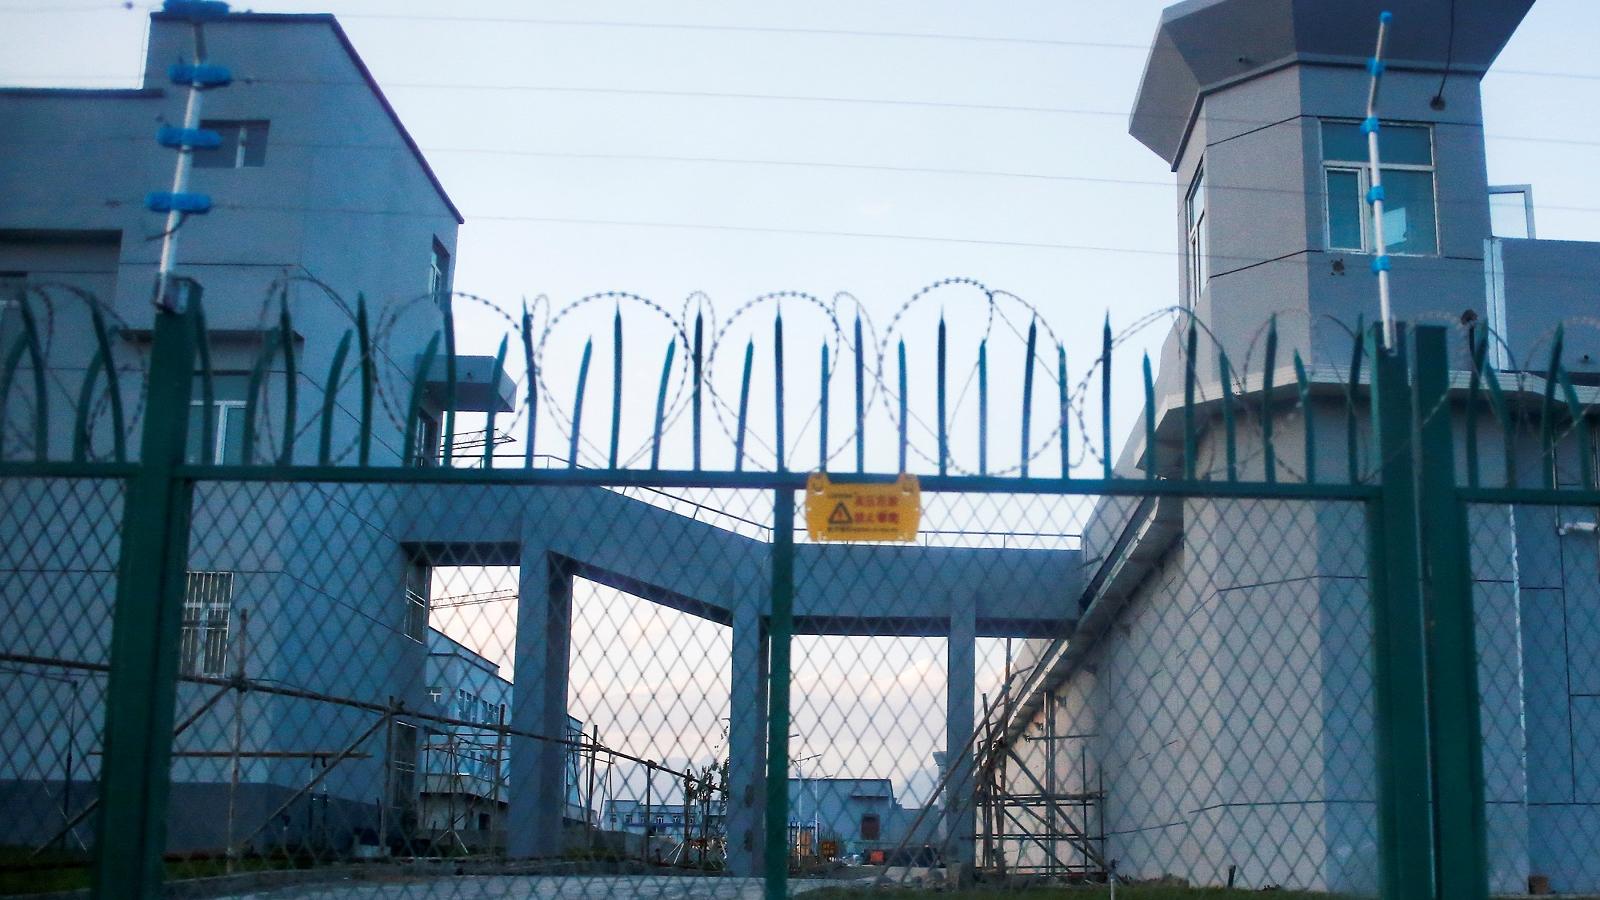 Large gates with barbed wire leading into a detention camp